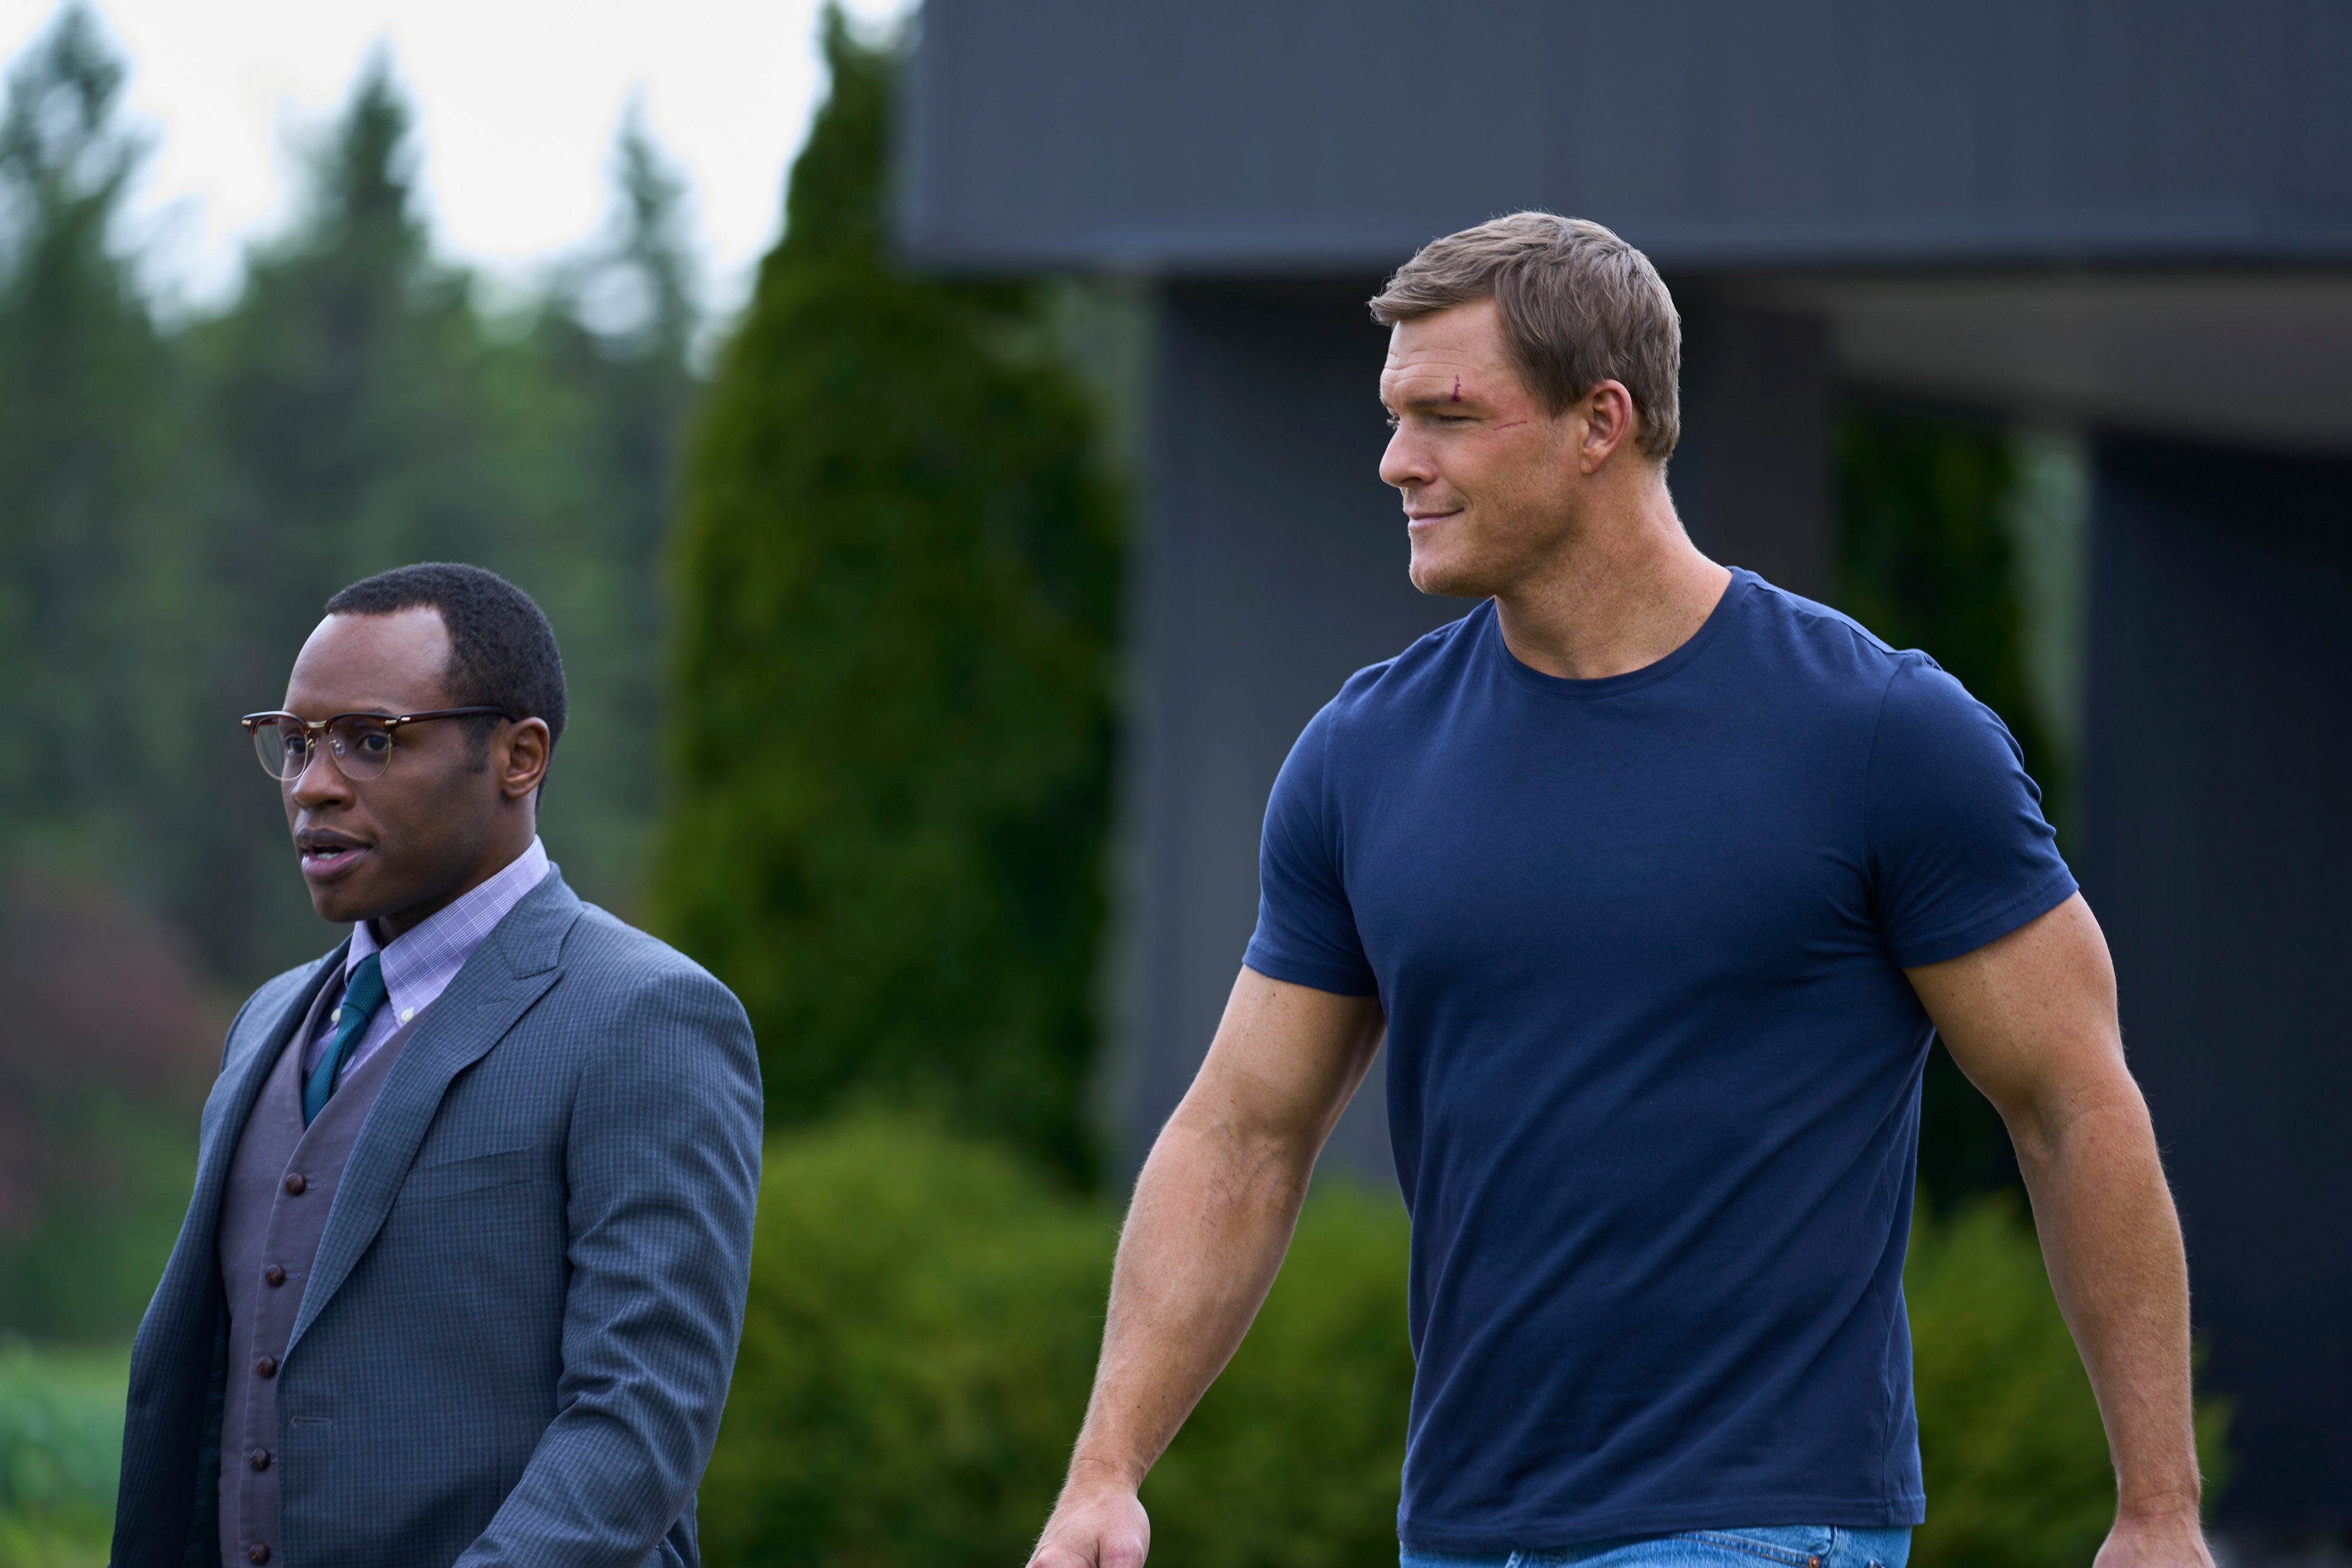 Malcolm Goodwin, wearing a suit, as Oscar Finlay and Alan Ritchson, wearing a short-sleeved blue T-shirt, as Jack Reacher in 'Reacher'